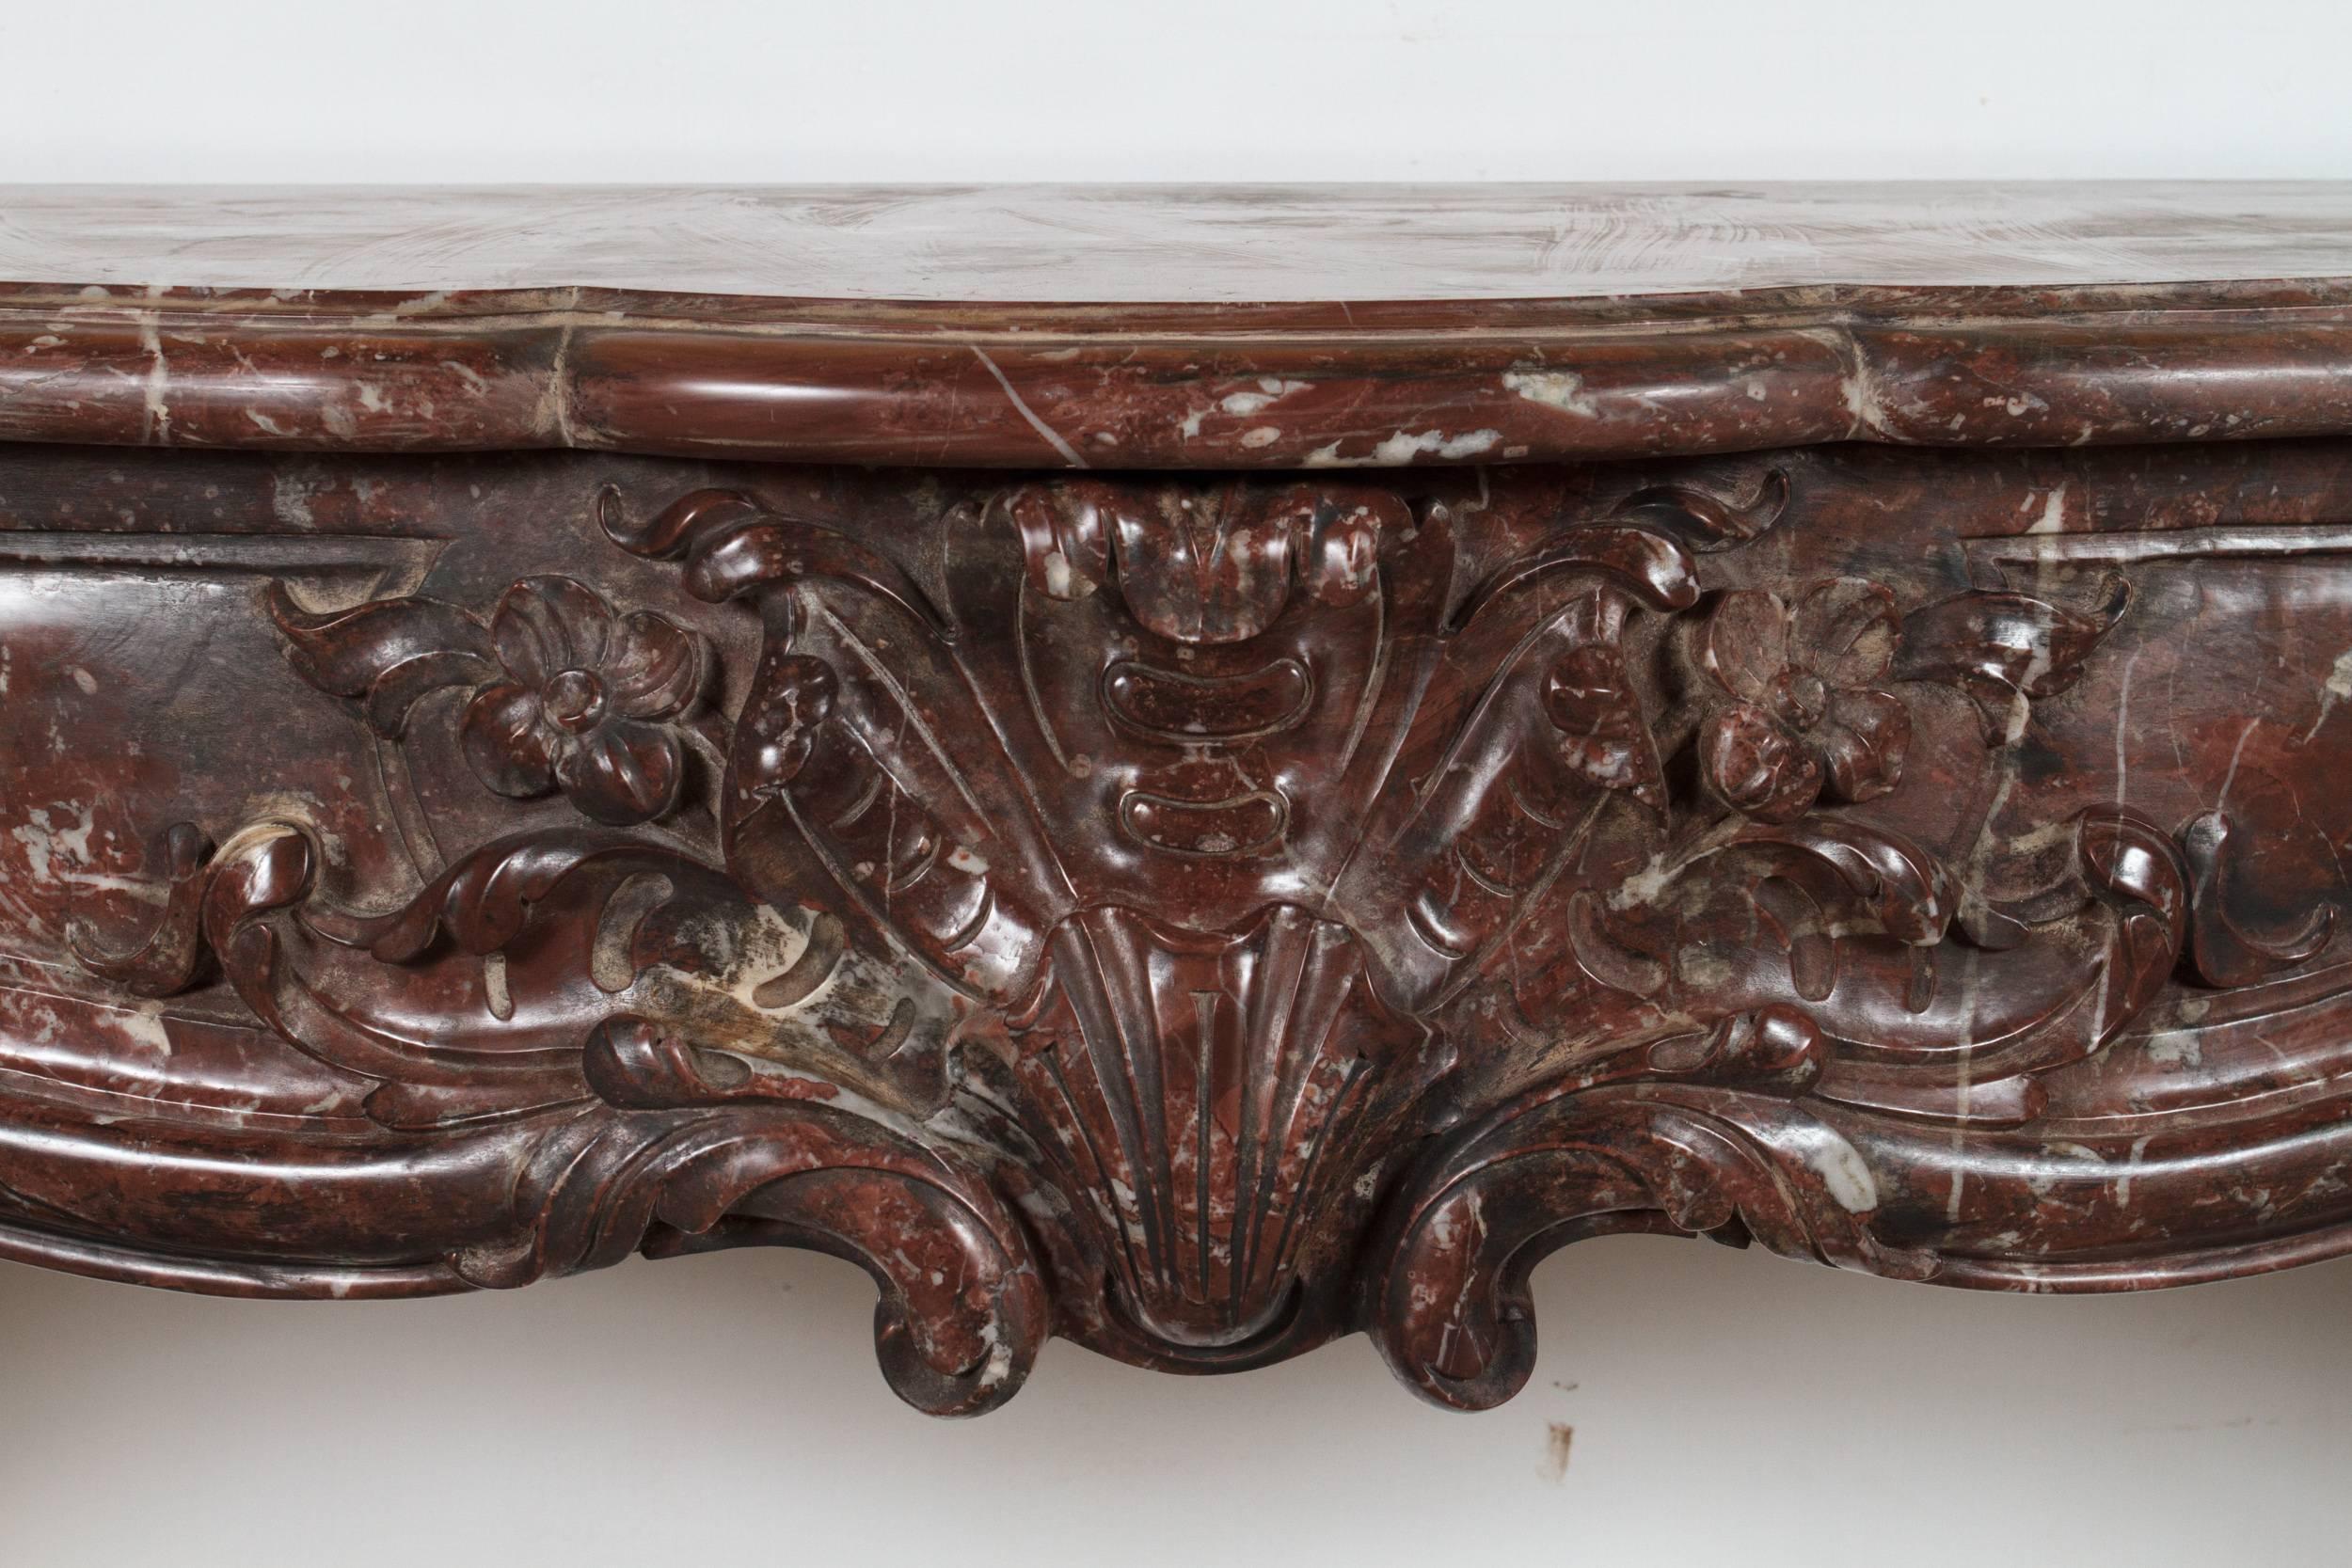 Beautiful Louis XV style rouge royal marble mantel. Napoleon III period, France. Interior dimensions: H 36.5 x W 45.5 po.
 